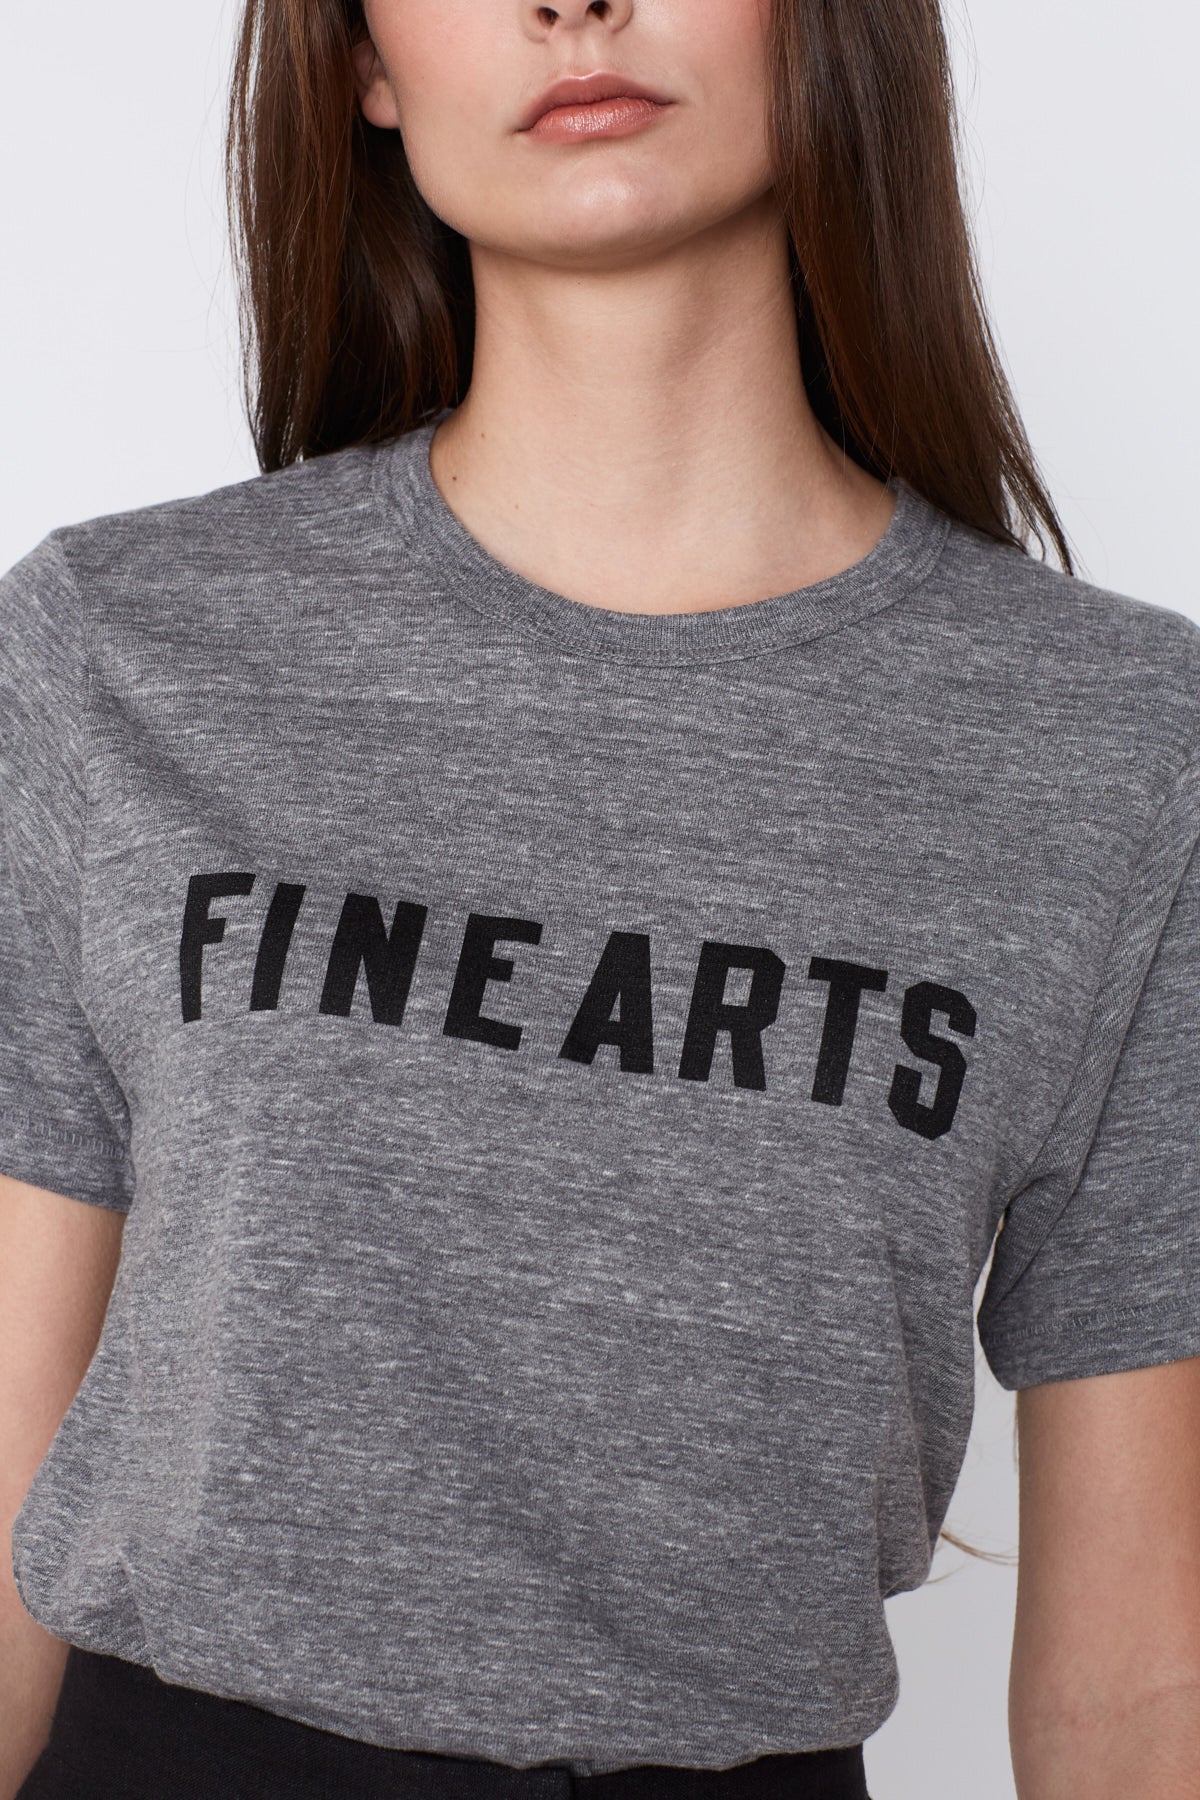 Fine Arts Eco-Jersey T-shirt in Classic Gray with Black. Made in Atlanta, ethically and sustainably, by slow fashion designer Megan Huntz. 